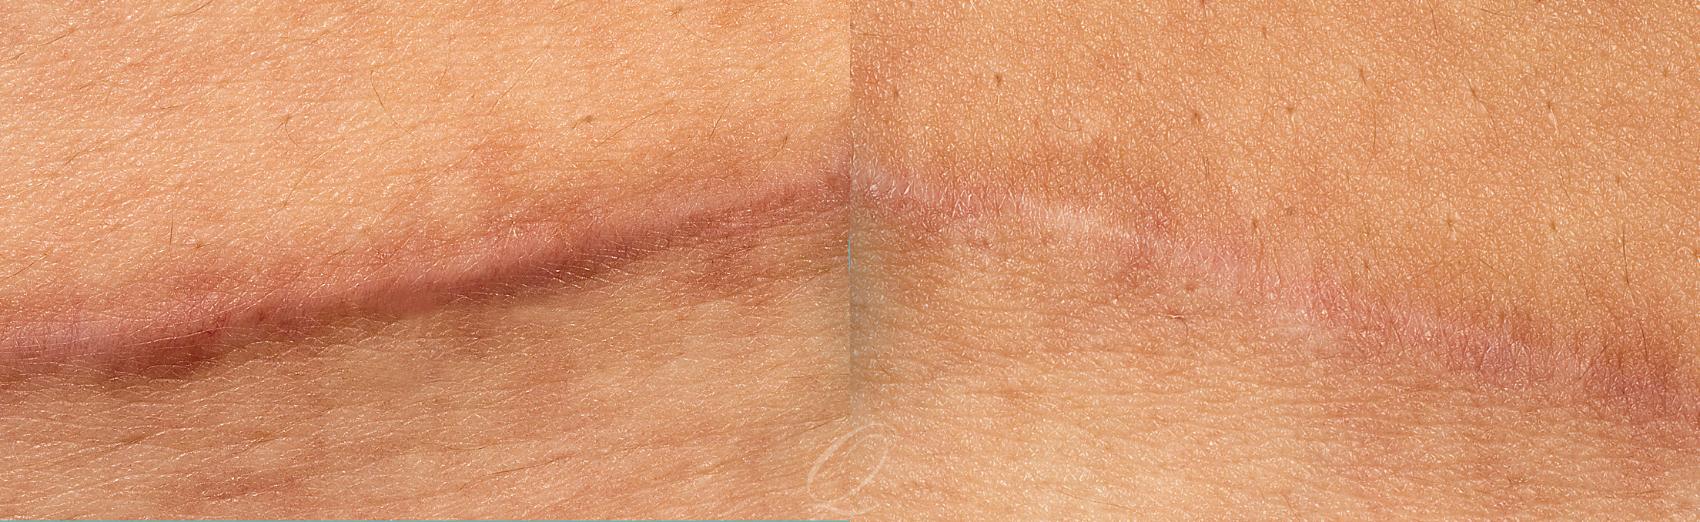 Scar Revision/Therapies Case 254 Before & After View #1 | Serving Rochester, Syracuse & Buffalo, NY | Quatela Center for Plastic Surgery